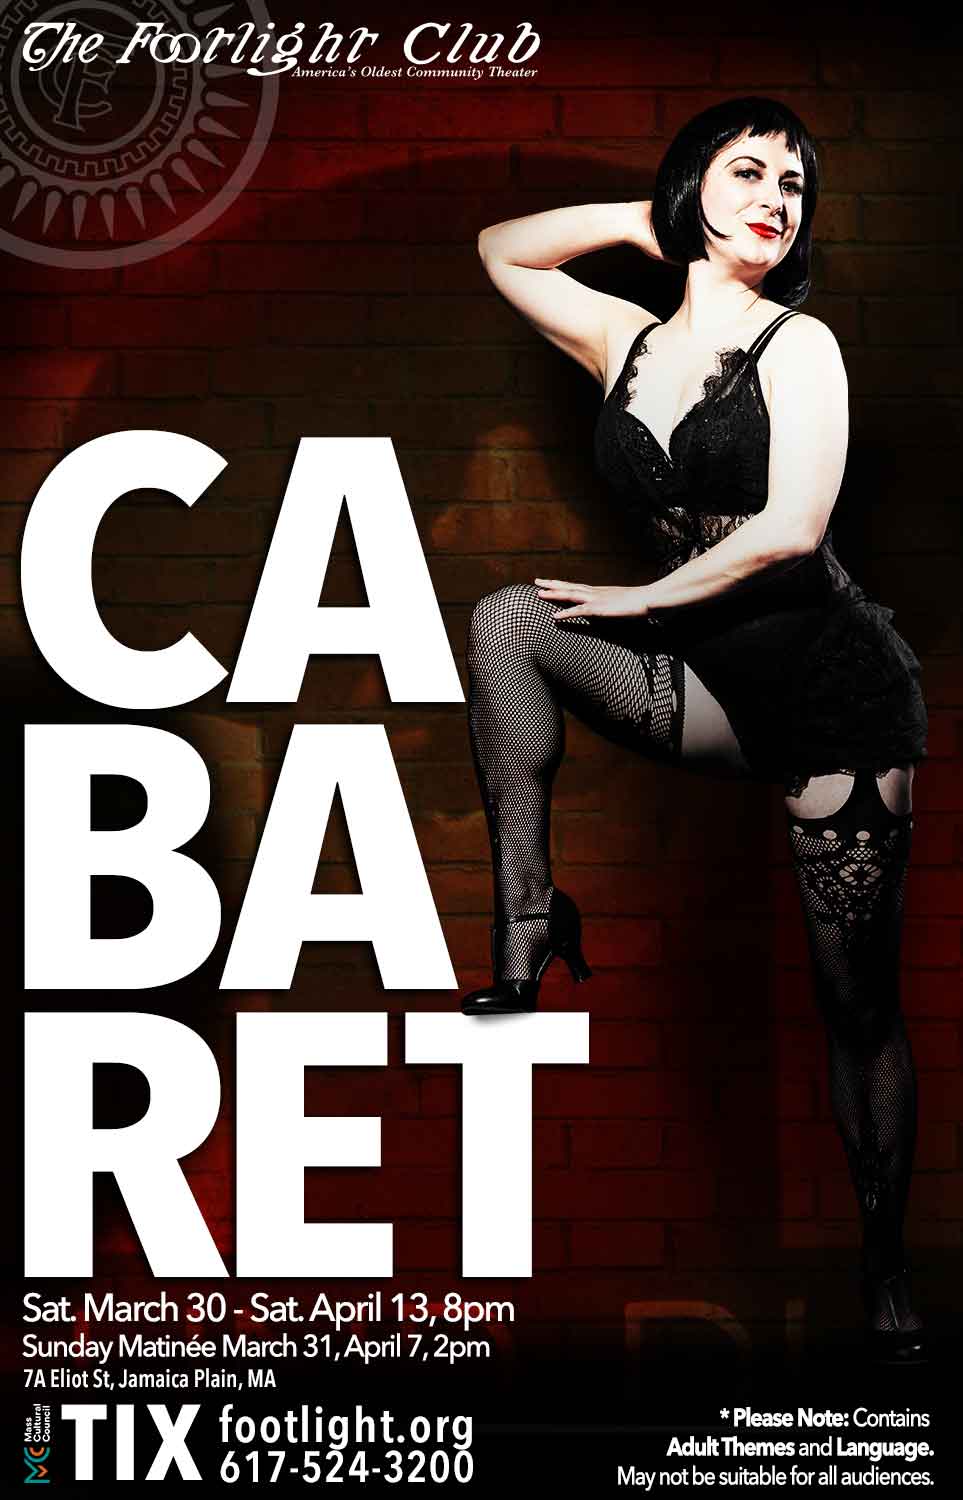 Perry Albert as Sally Bowles in the Footlight Club production of Cabaret